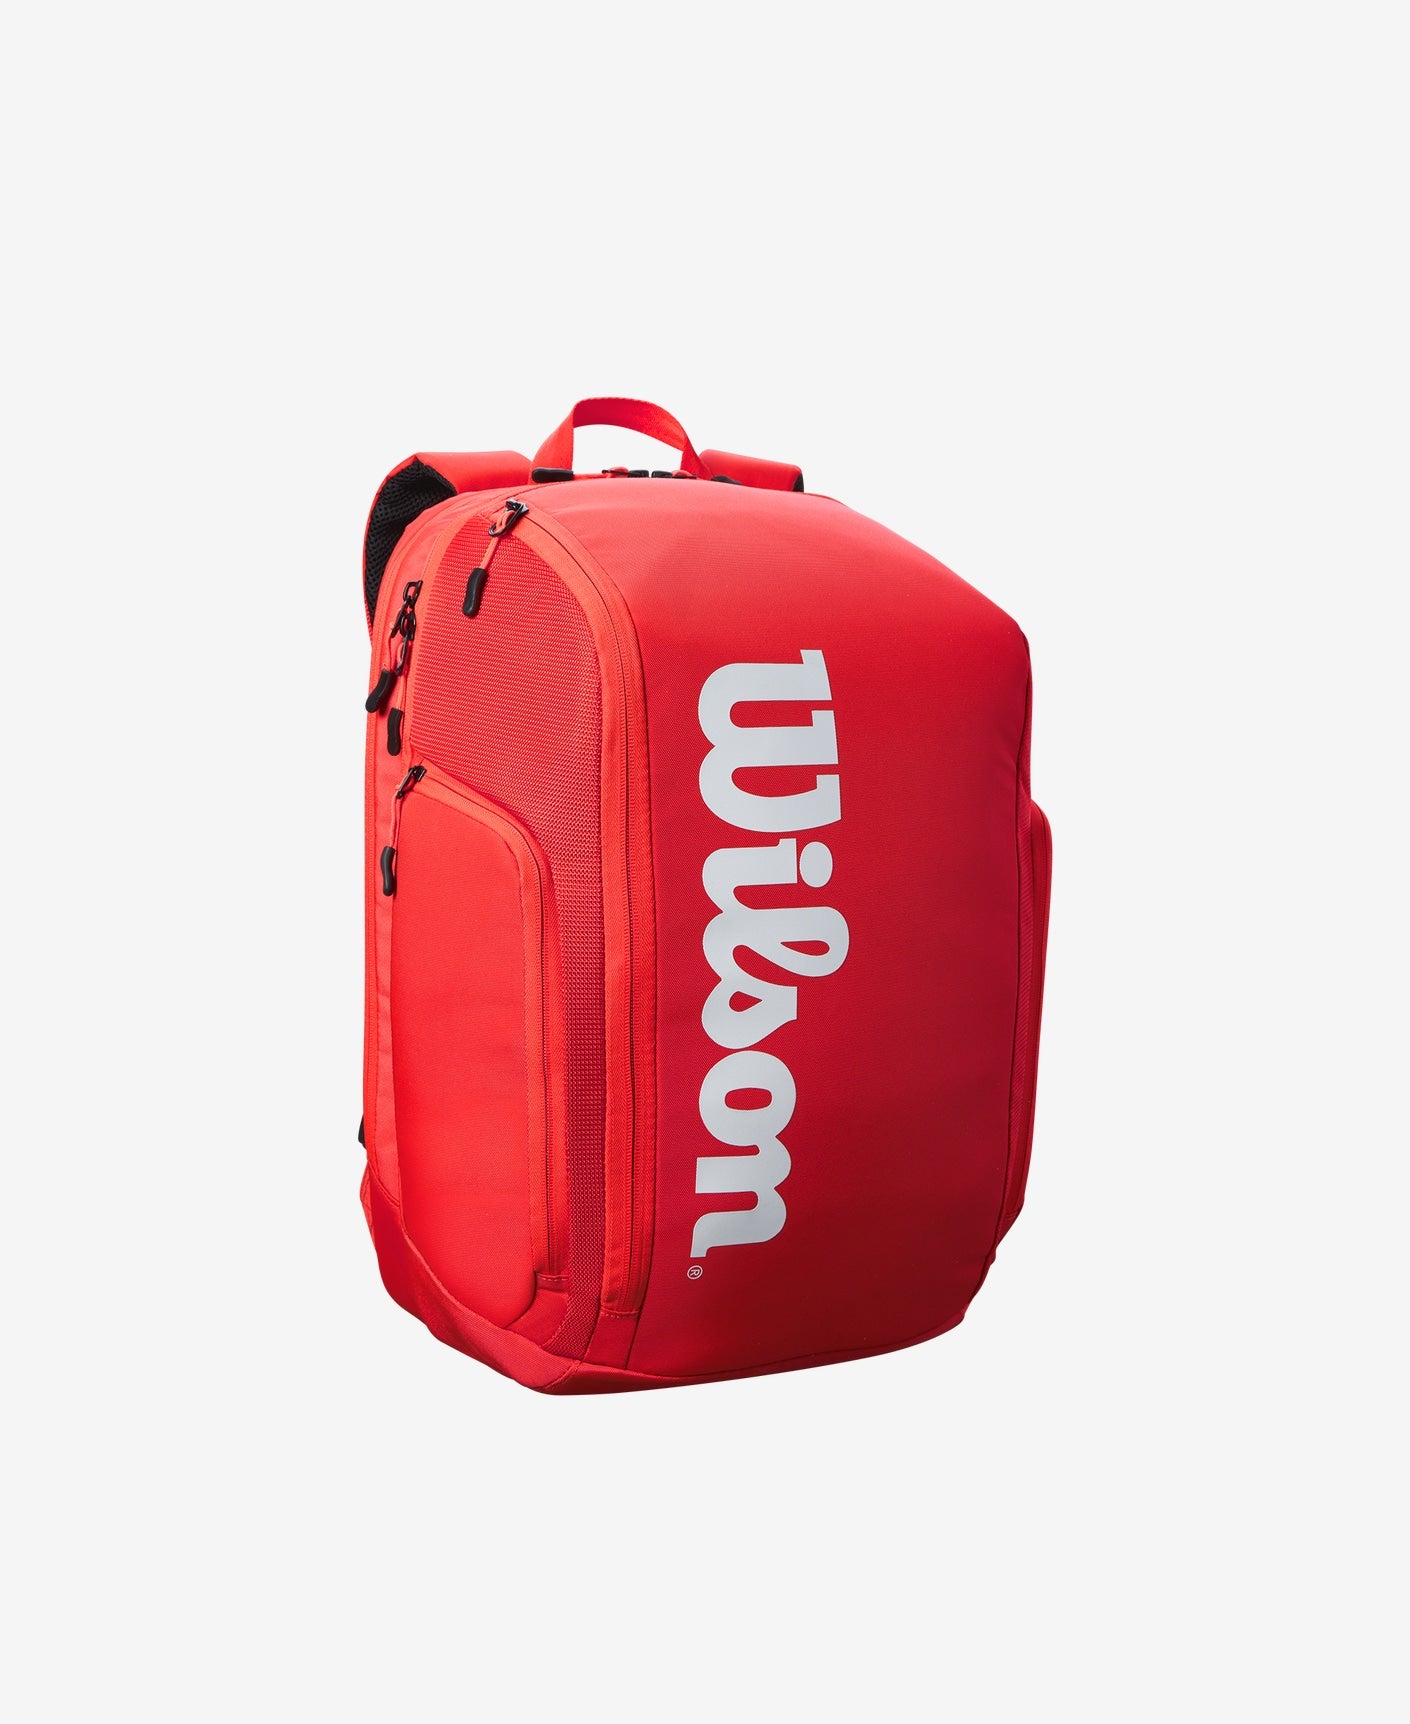 Classic Design of the Wilson Super Tour Backpack - Red